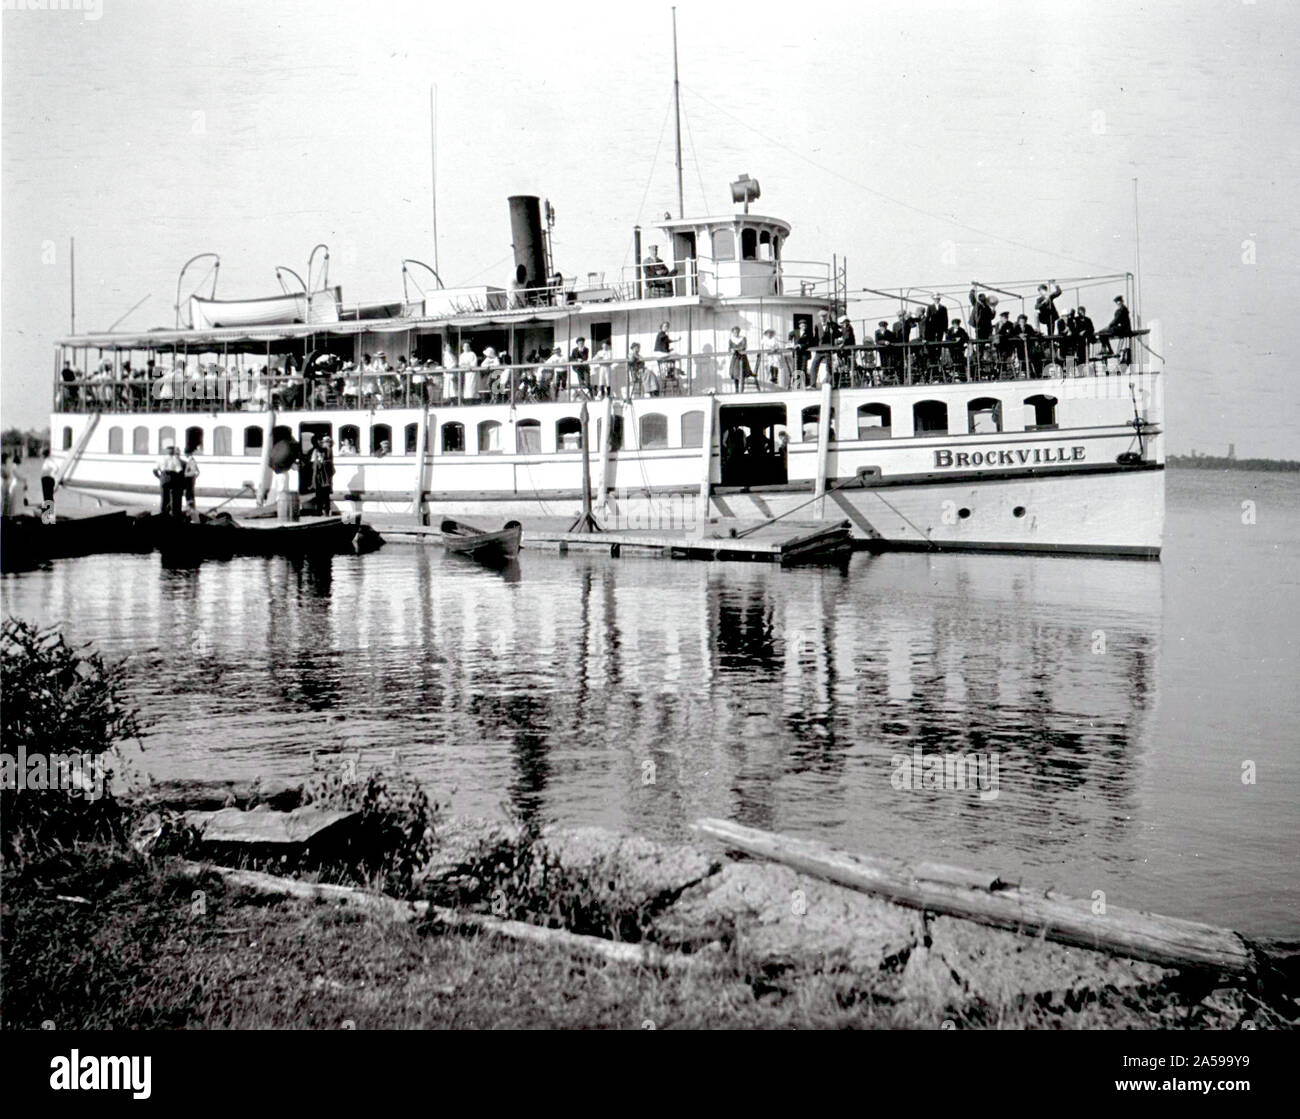 The Brockville, with many people on board. This photograph was taken on 9 July 1908, possibly at Massassauga Point, Prince Edward County, Ontario Stock Photo